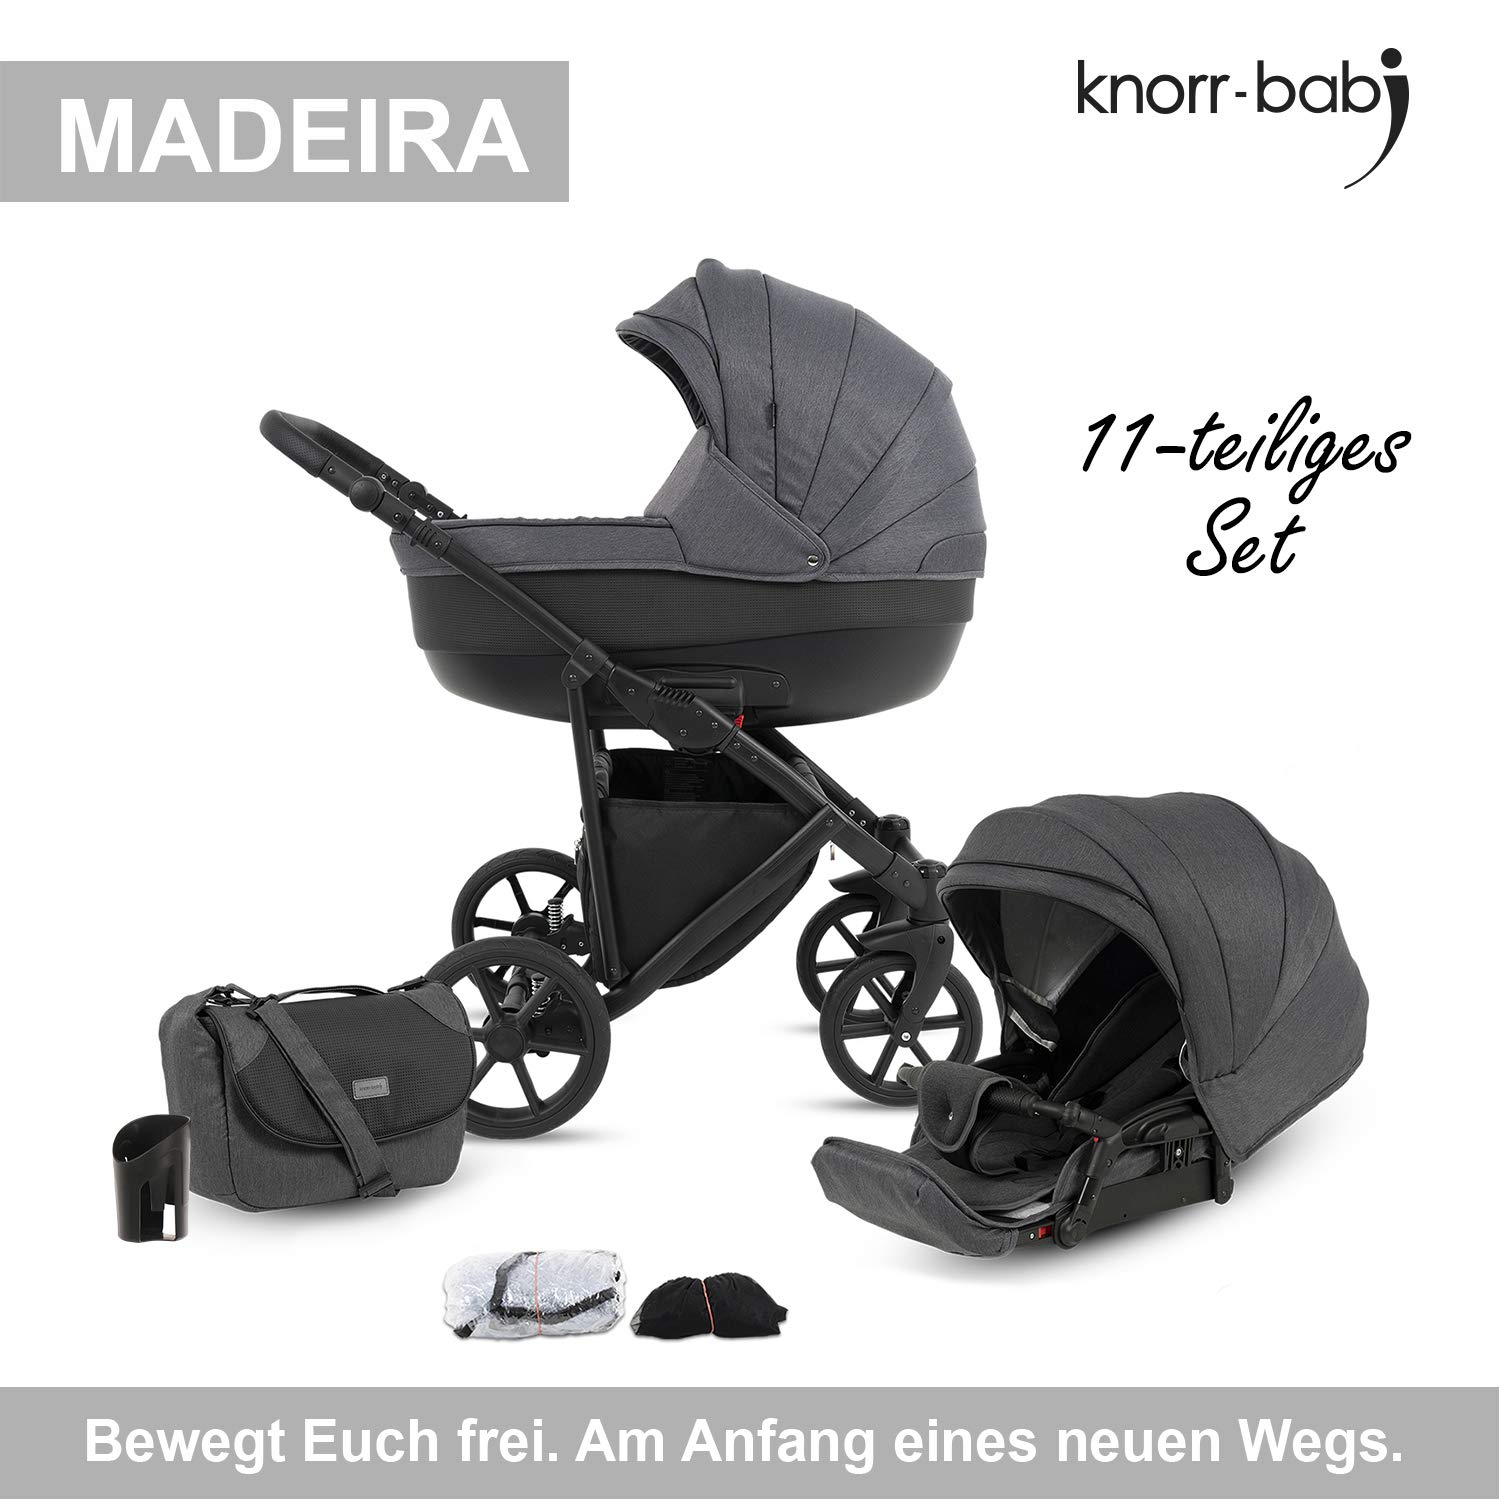 knorr-baby MADEIRA 2620-02 Combination Pushchair Black